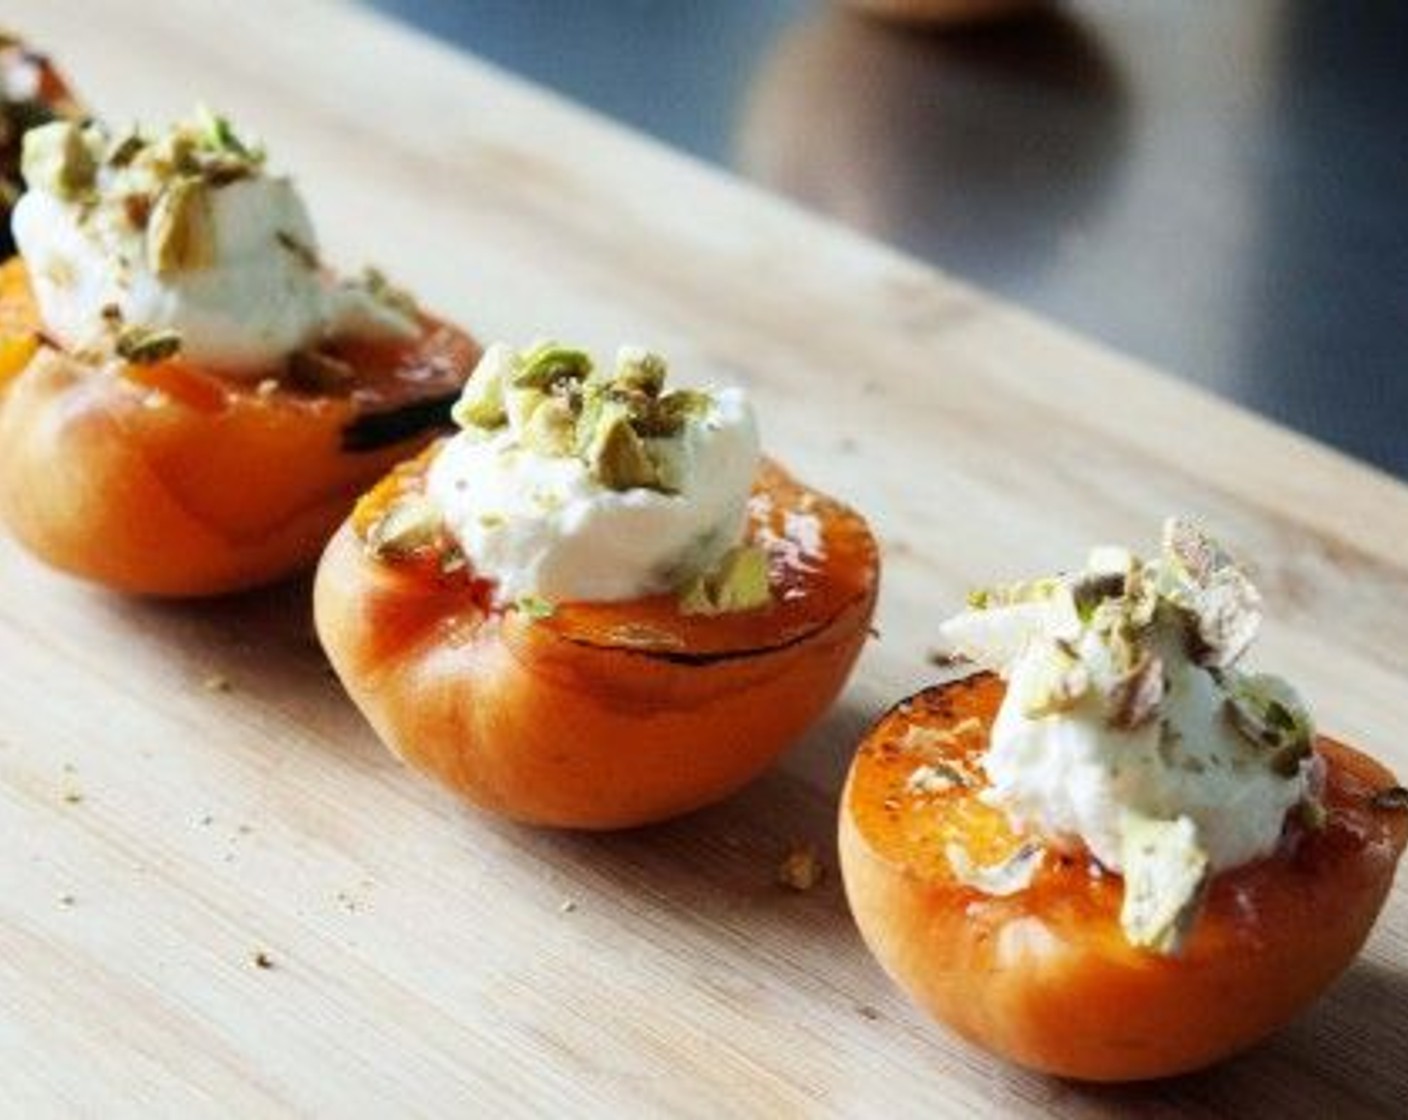 step 3 Remove from the oven, place one teaspoon of Ricotta Cheese (1/3 cup) in the center of each apricot. Sprinkle with Pistachios (1/4 cup) and serve.